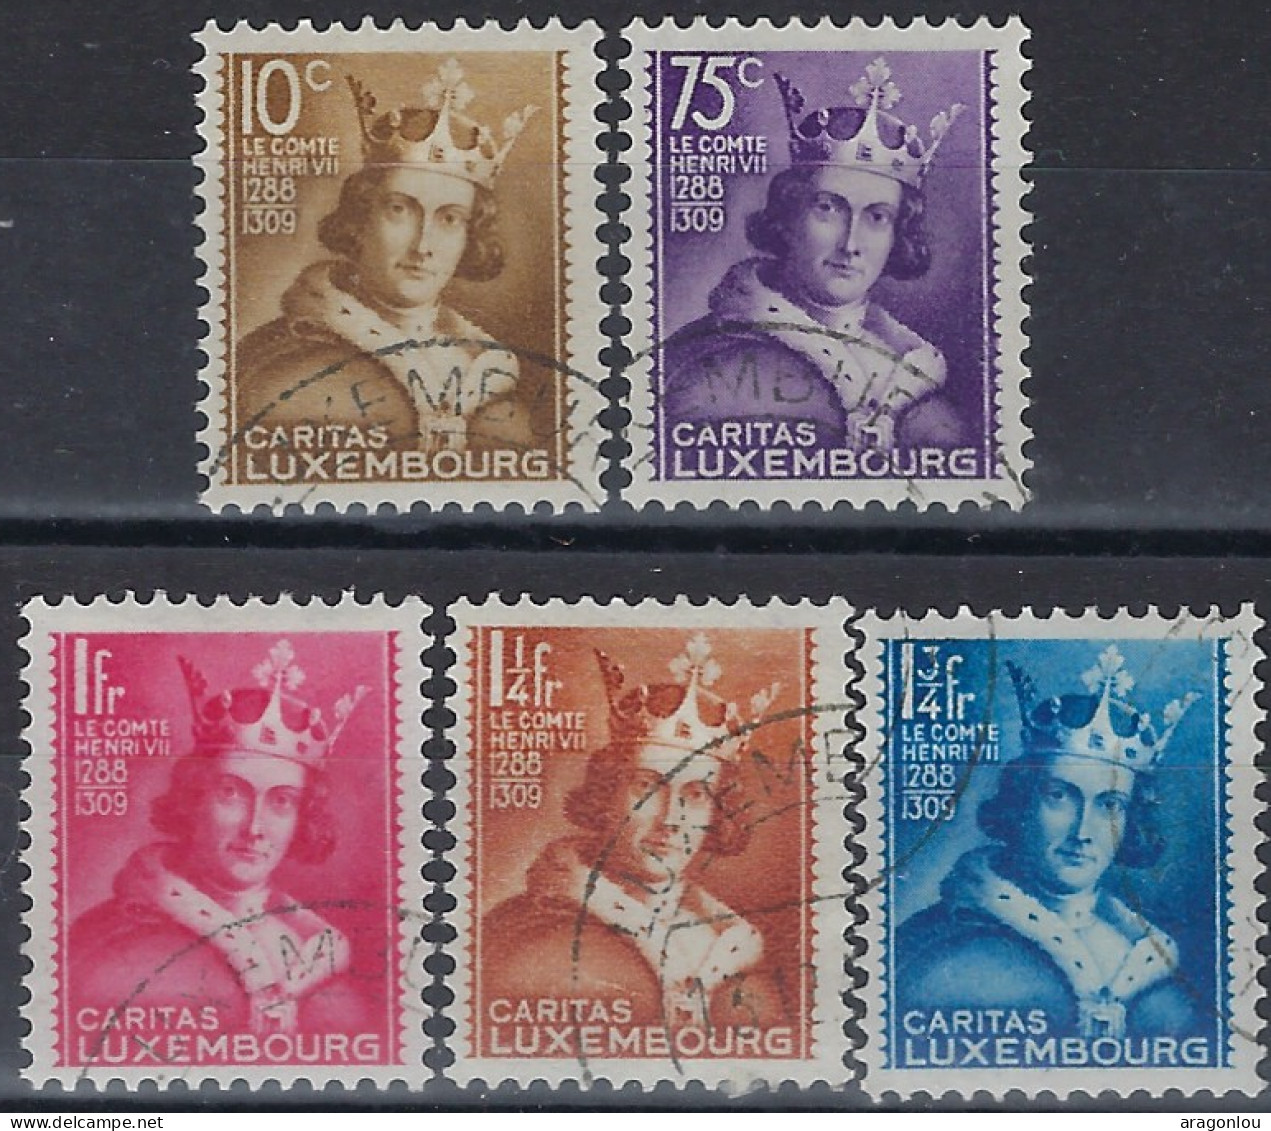 Luxembourg - Luxemburrg - Timbres  1933    Henri IV      Série   ° - Used Stamps